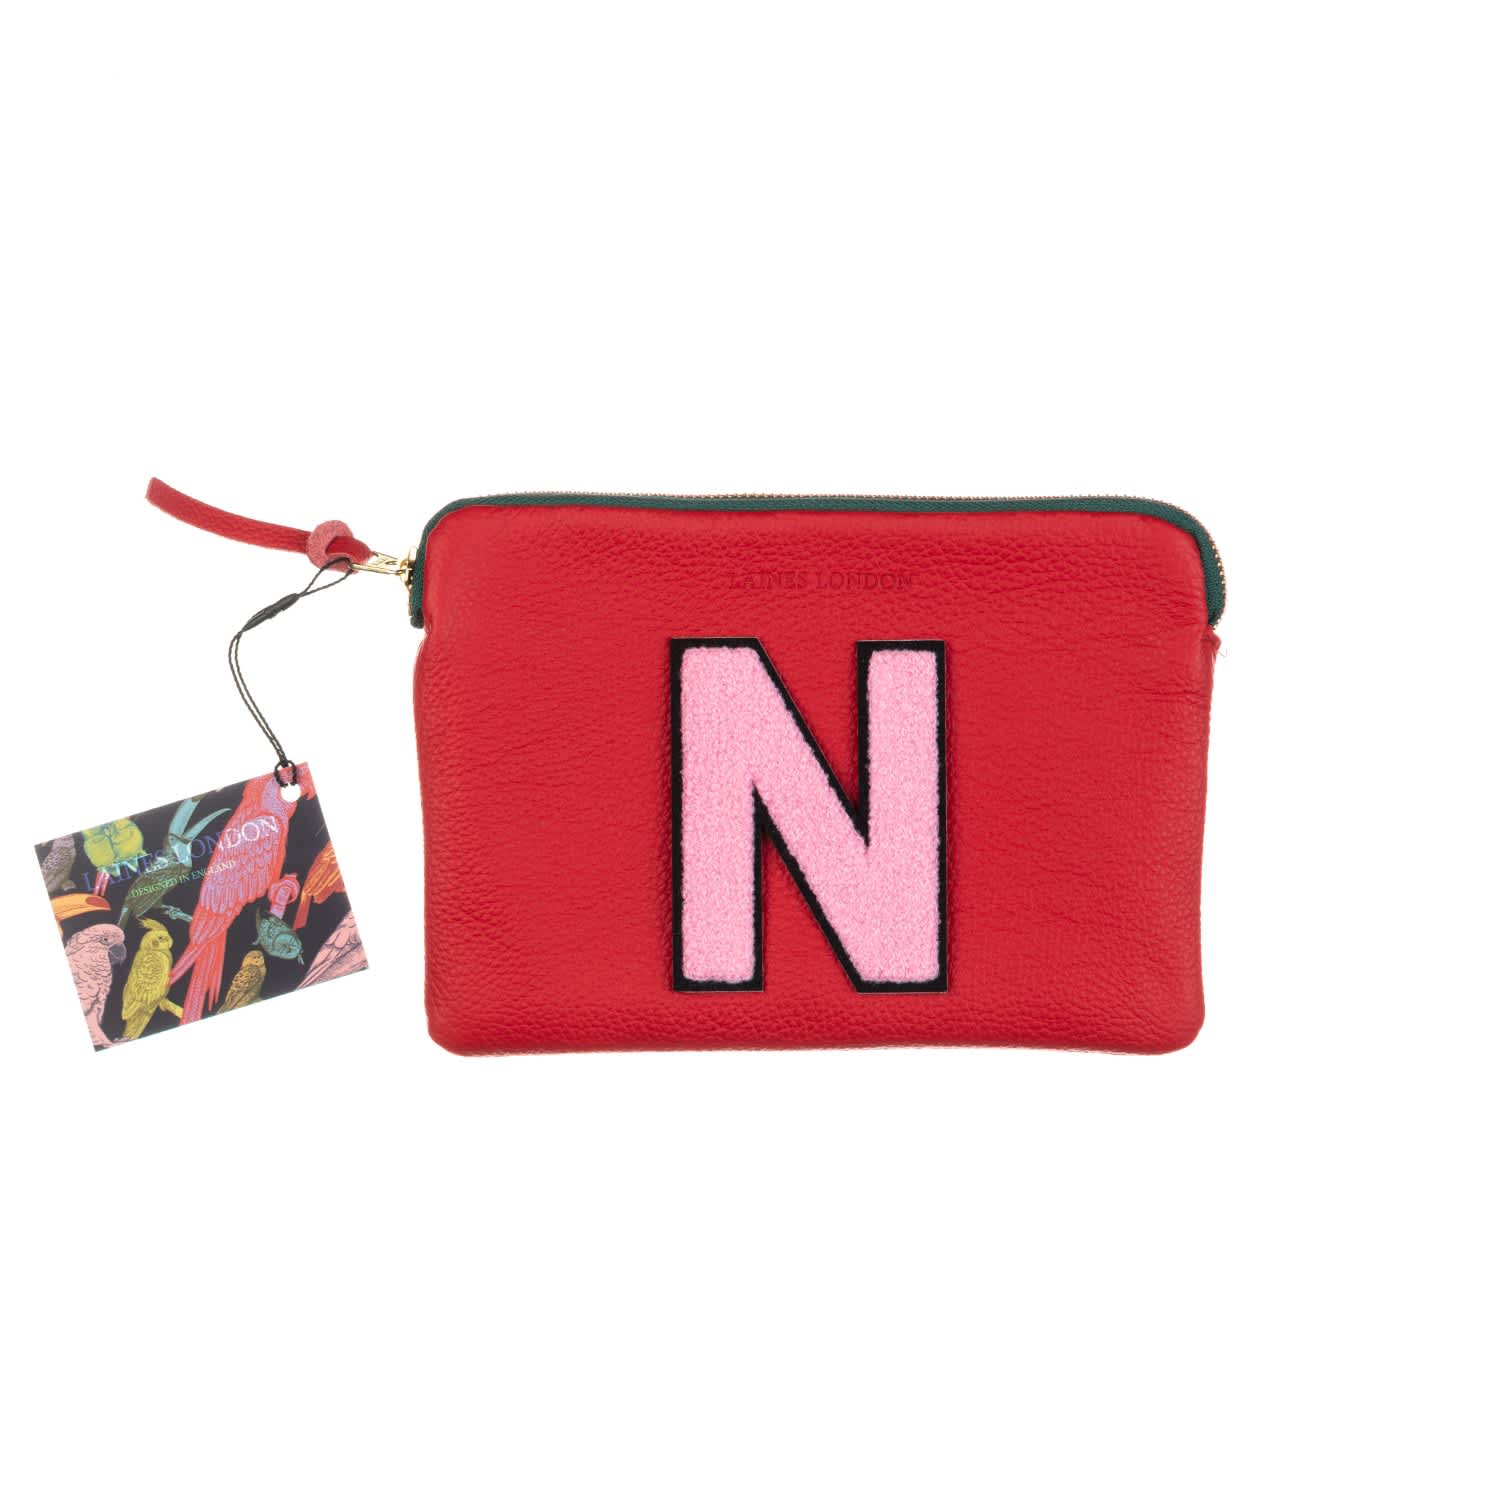 small red clutch bag